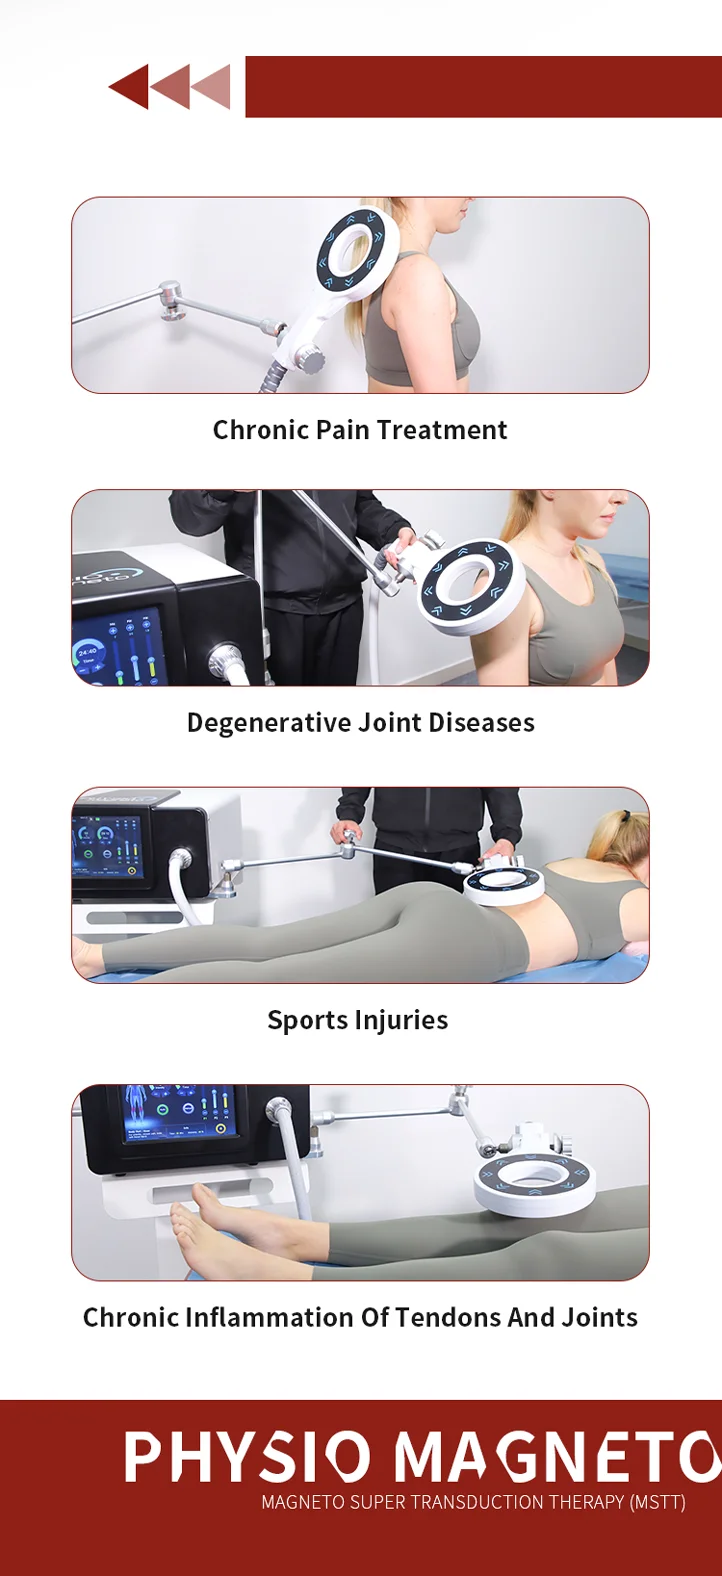 Portable Emtt Physio Magneto Therapy Back Pain Massage Machine Physiotherapy Magnetherapy PEST Sports Injury Body Pain Relief